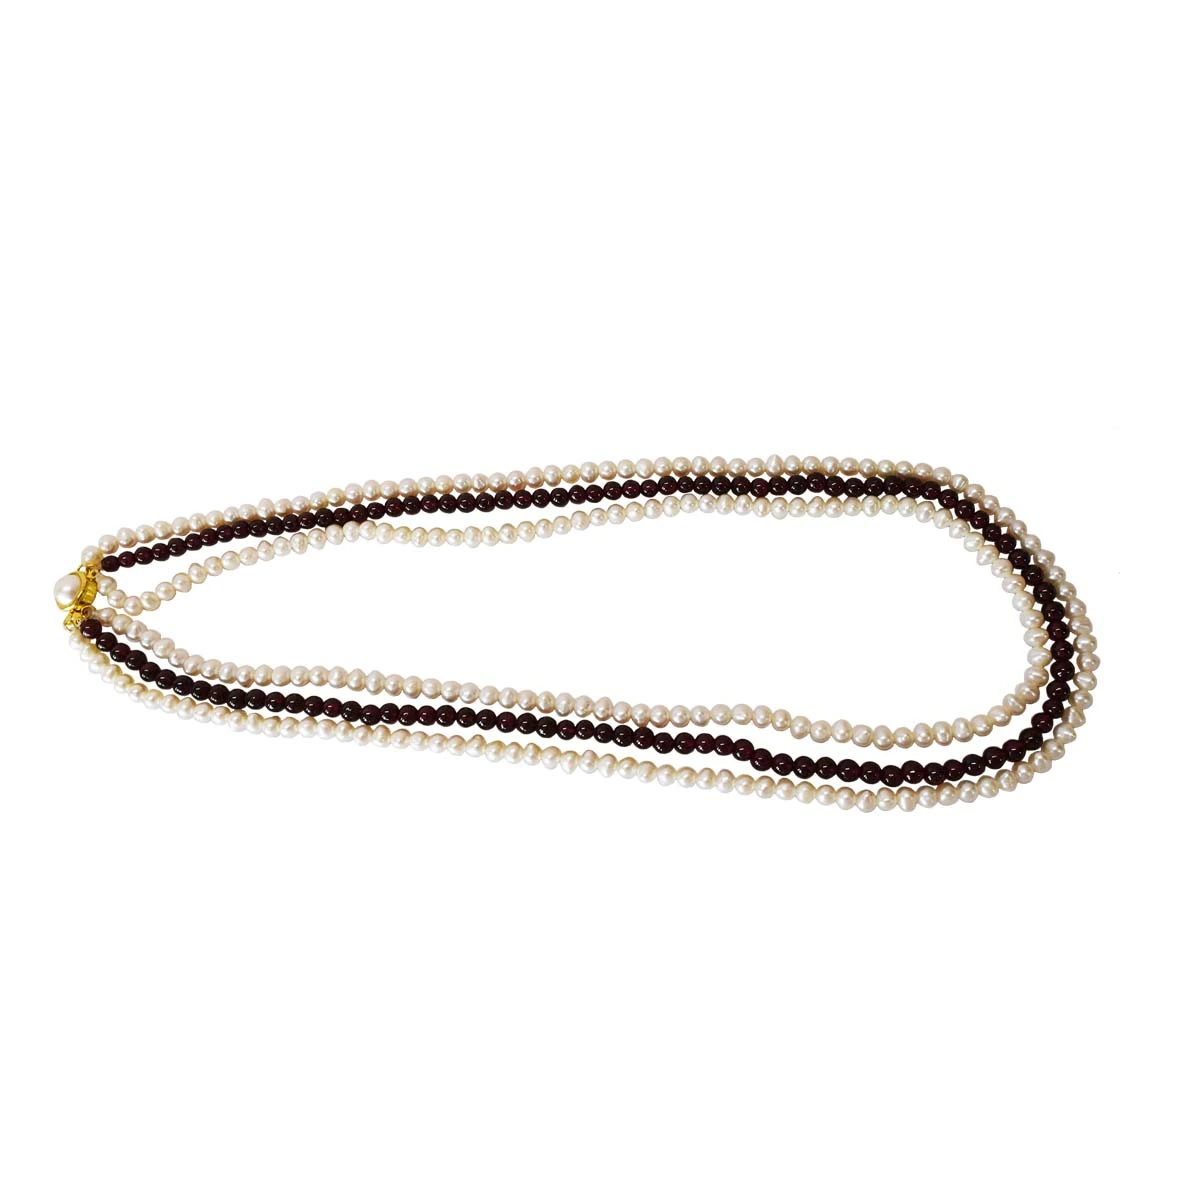 Three Line Real Pearl & Red Garnet Necklace (SN998)